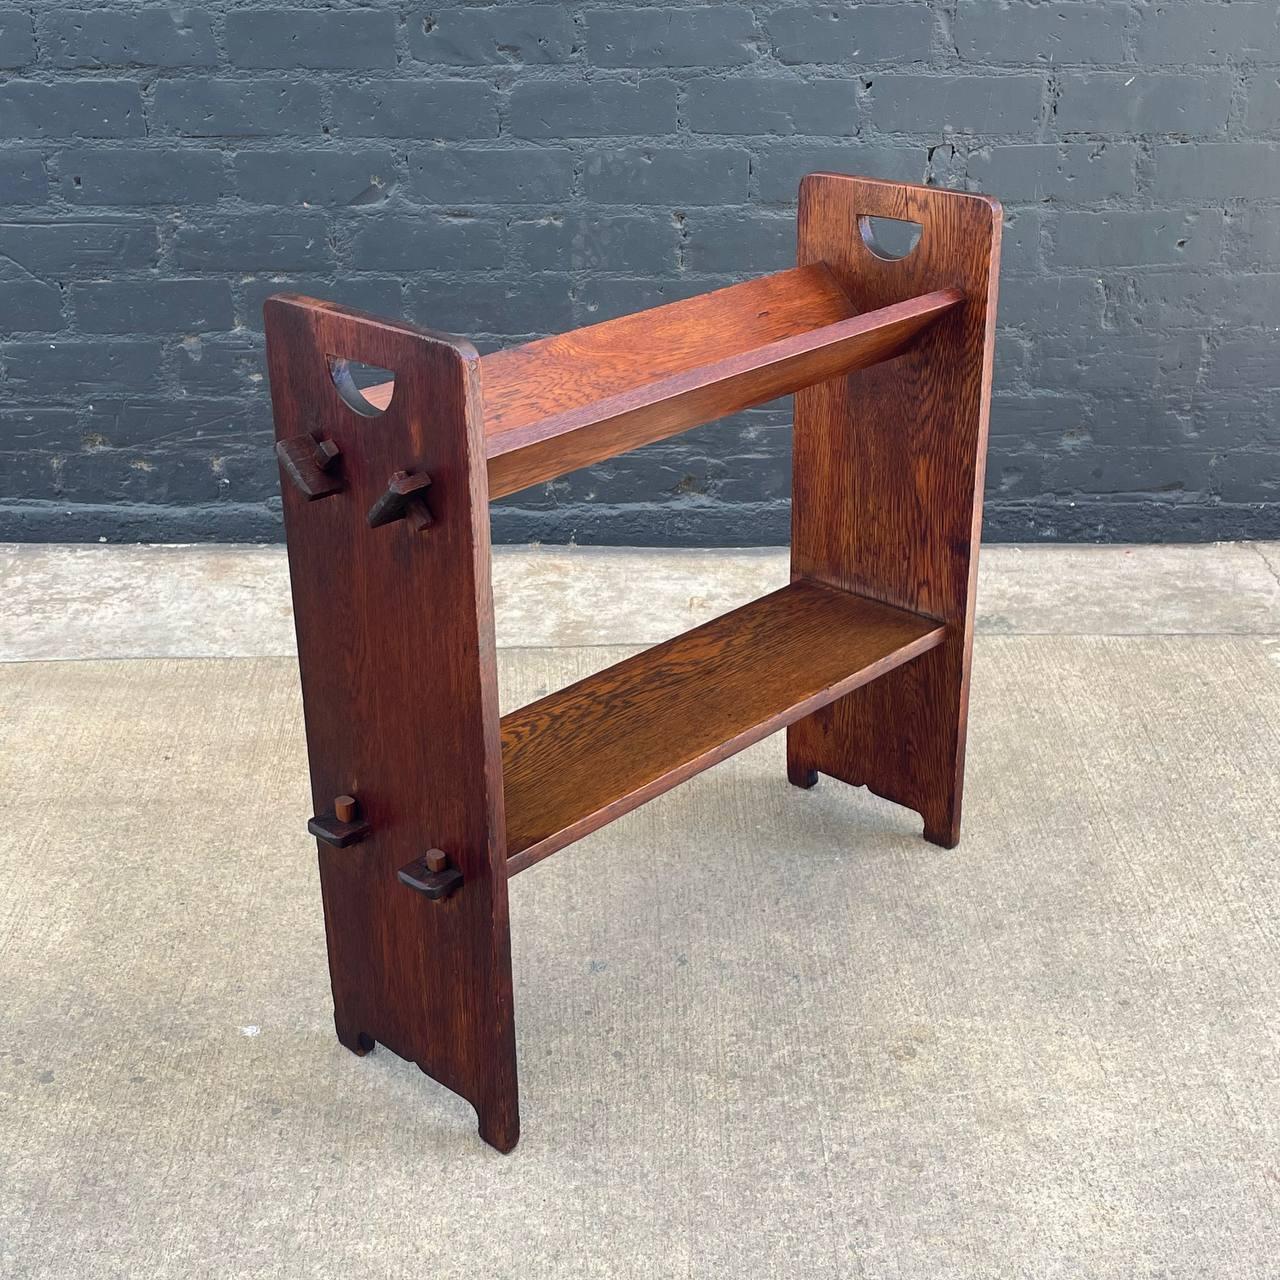 Signed Antique Mission Oak Craftsman Bookshelf Rack by Stickley, Model 74

Designer: Stickley 
Country: United Stated
Manufacturer: Stickley 
Materials: Oak Wood
Style: Arts & Crafts 
Year: 1910’s

$1,295

Dimensions:
31”H x 32.50”W x